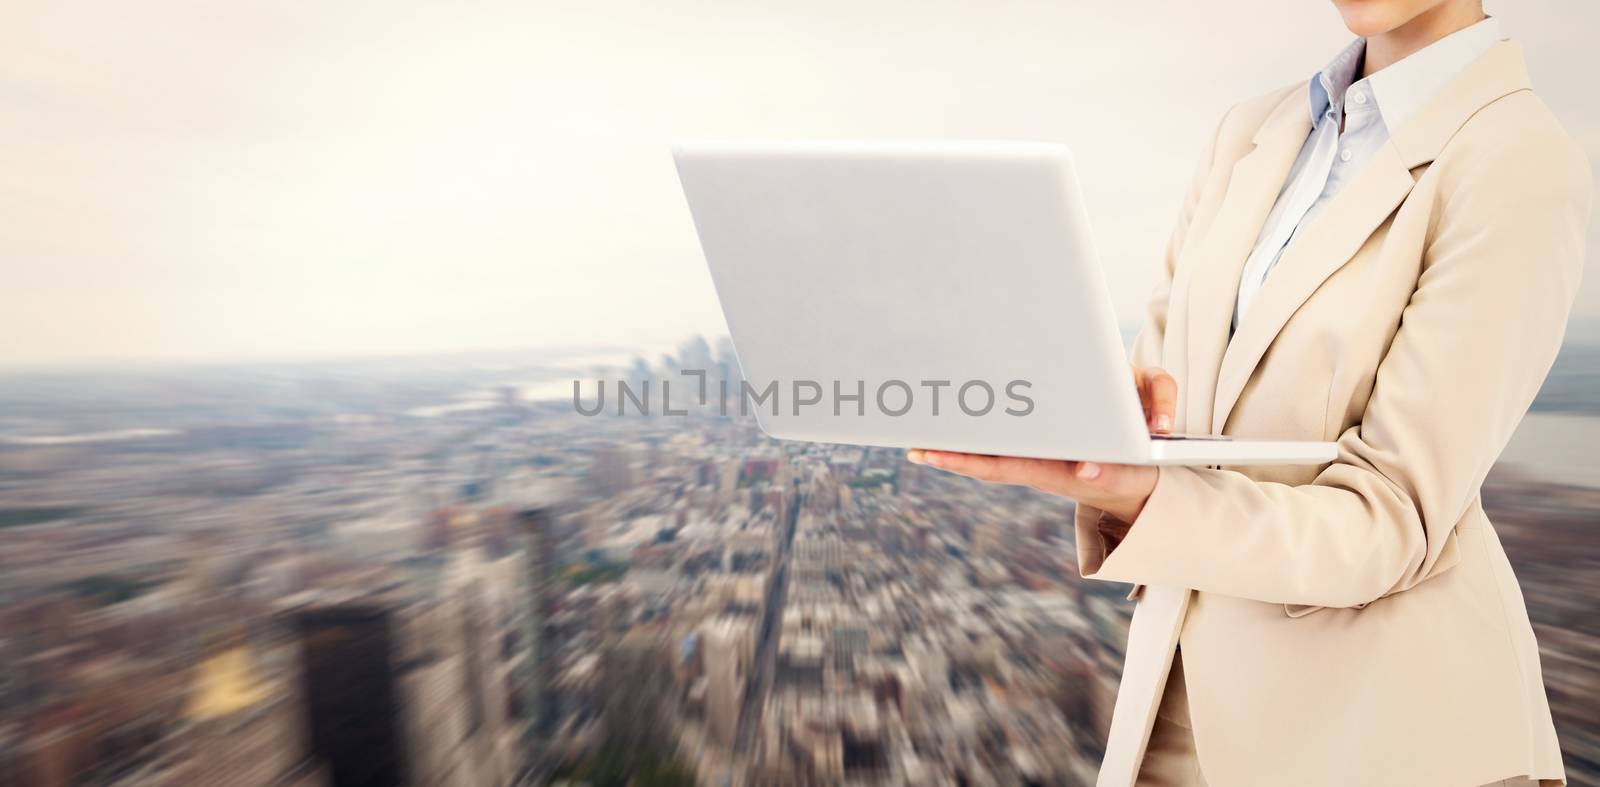 Composite image of confident businesswoman holding laptop by Wavebreakmedia